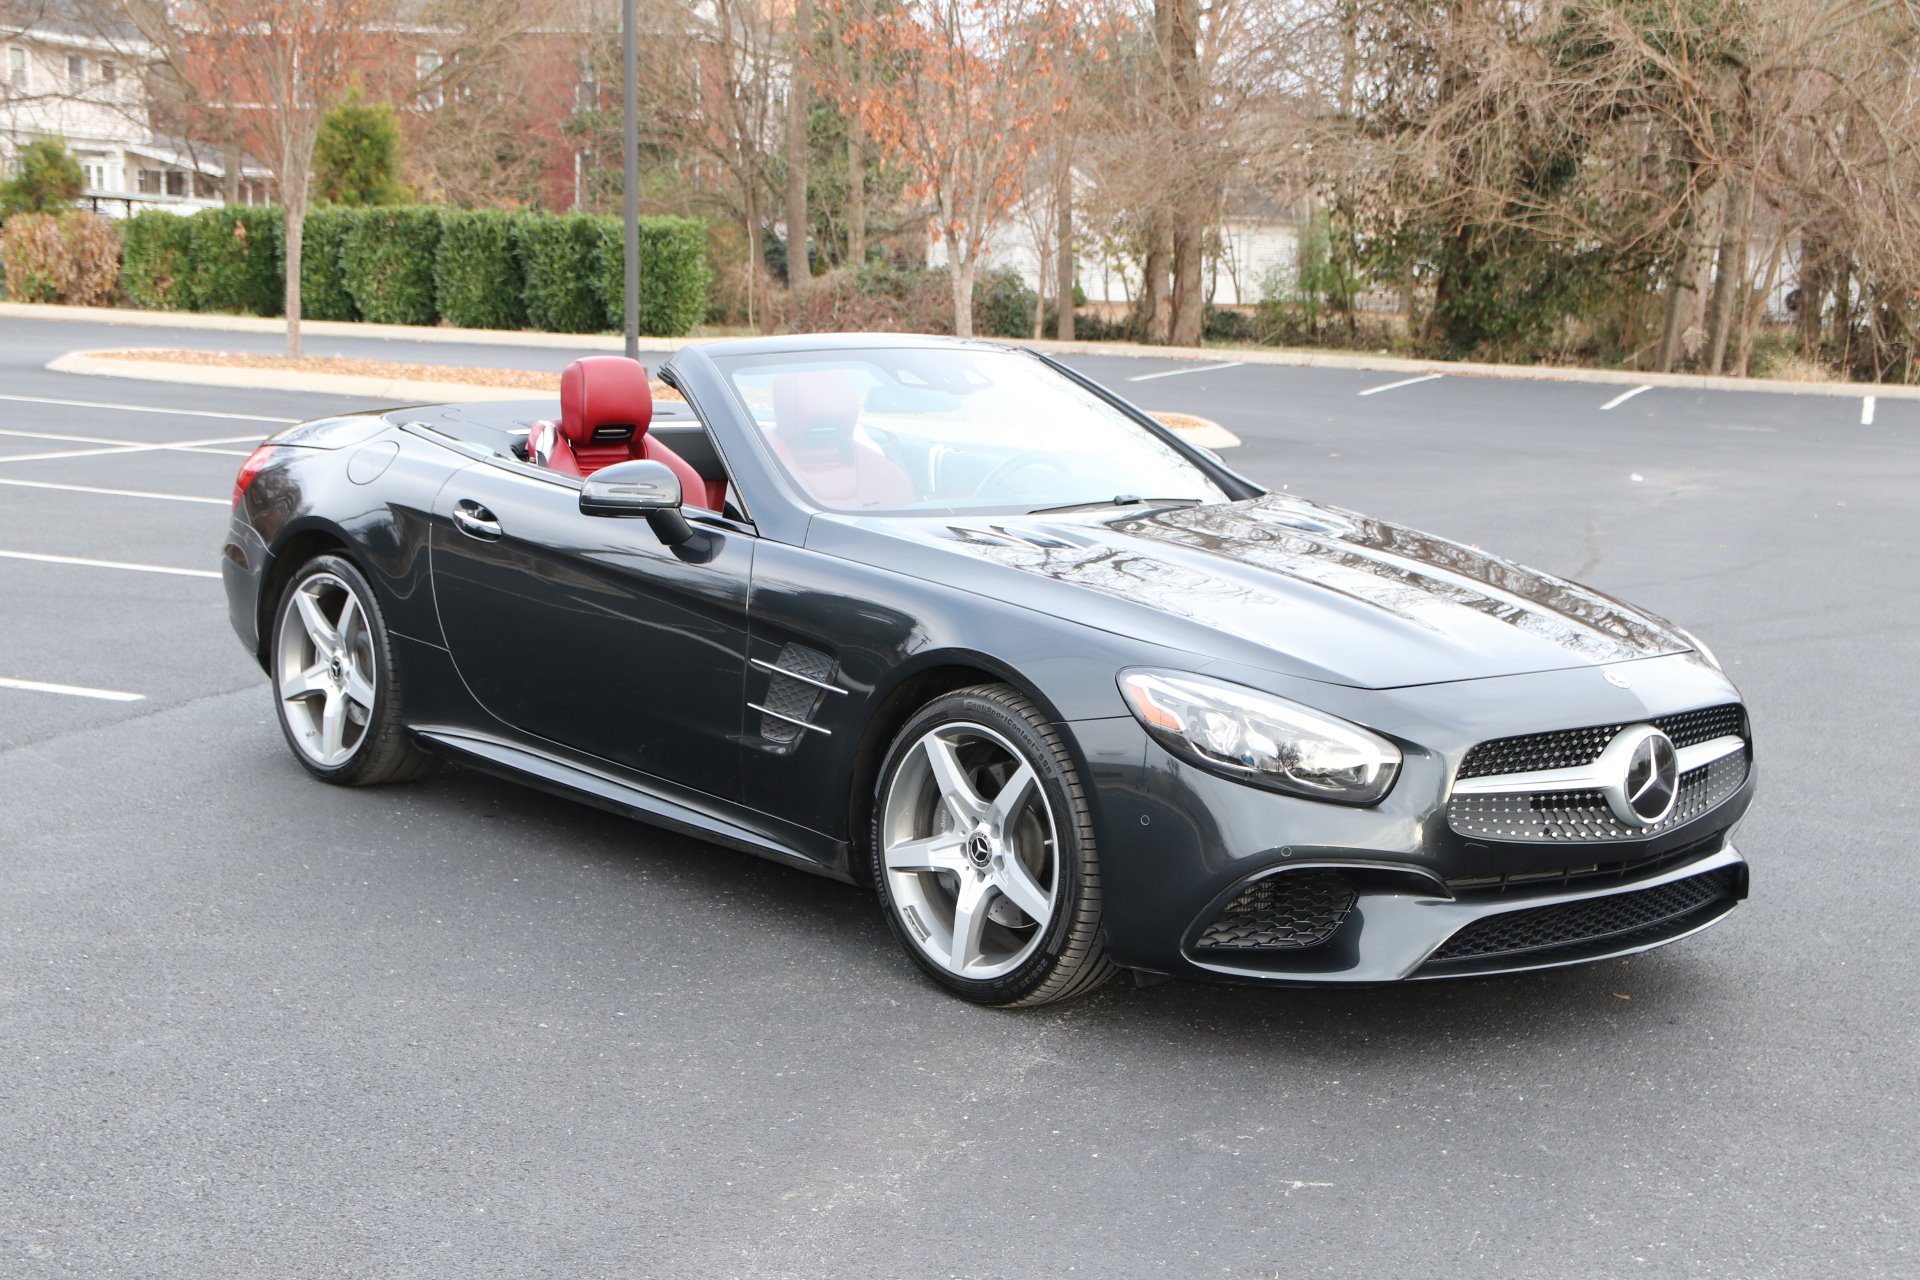 Used 2018 Mercedes Benz Sl550 Roadster W Nav Sl 550 For Sale 74 950 Auto Collection Stock F051429